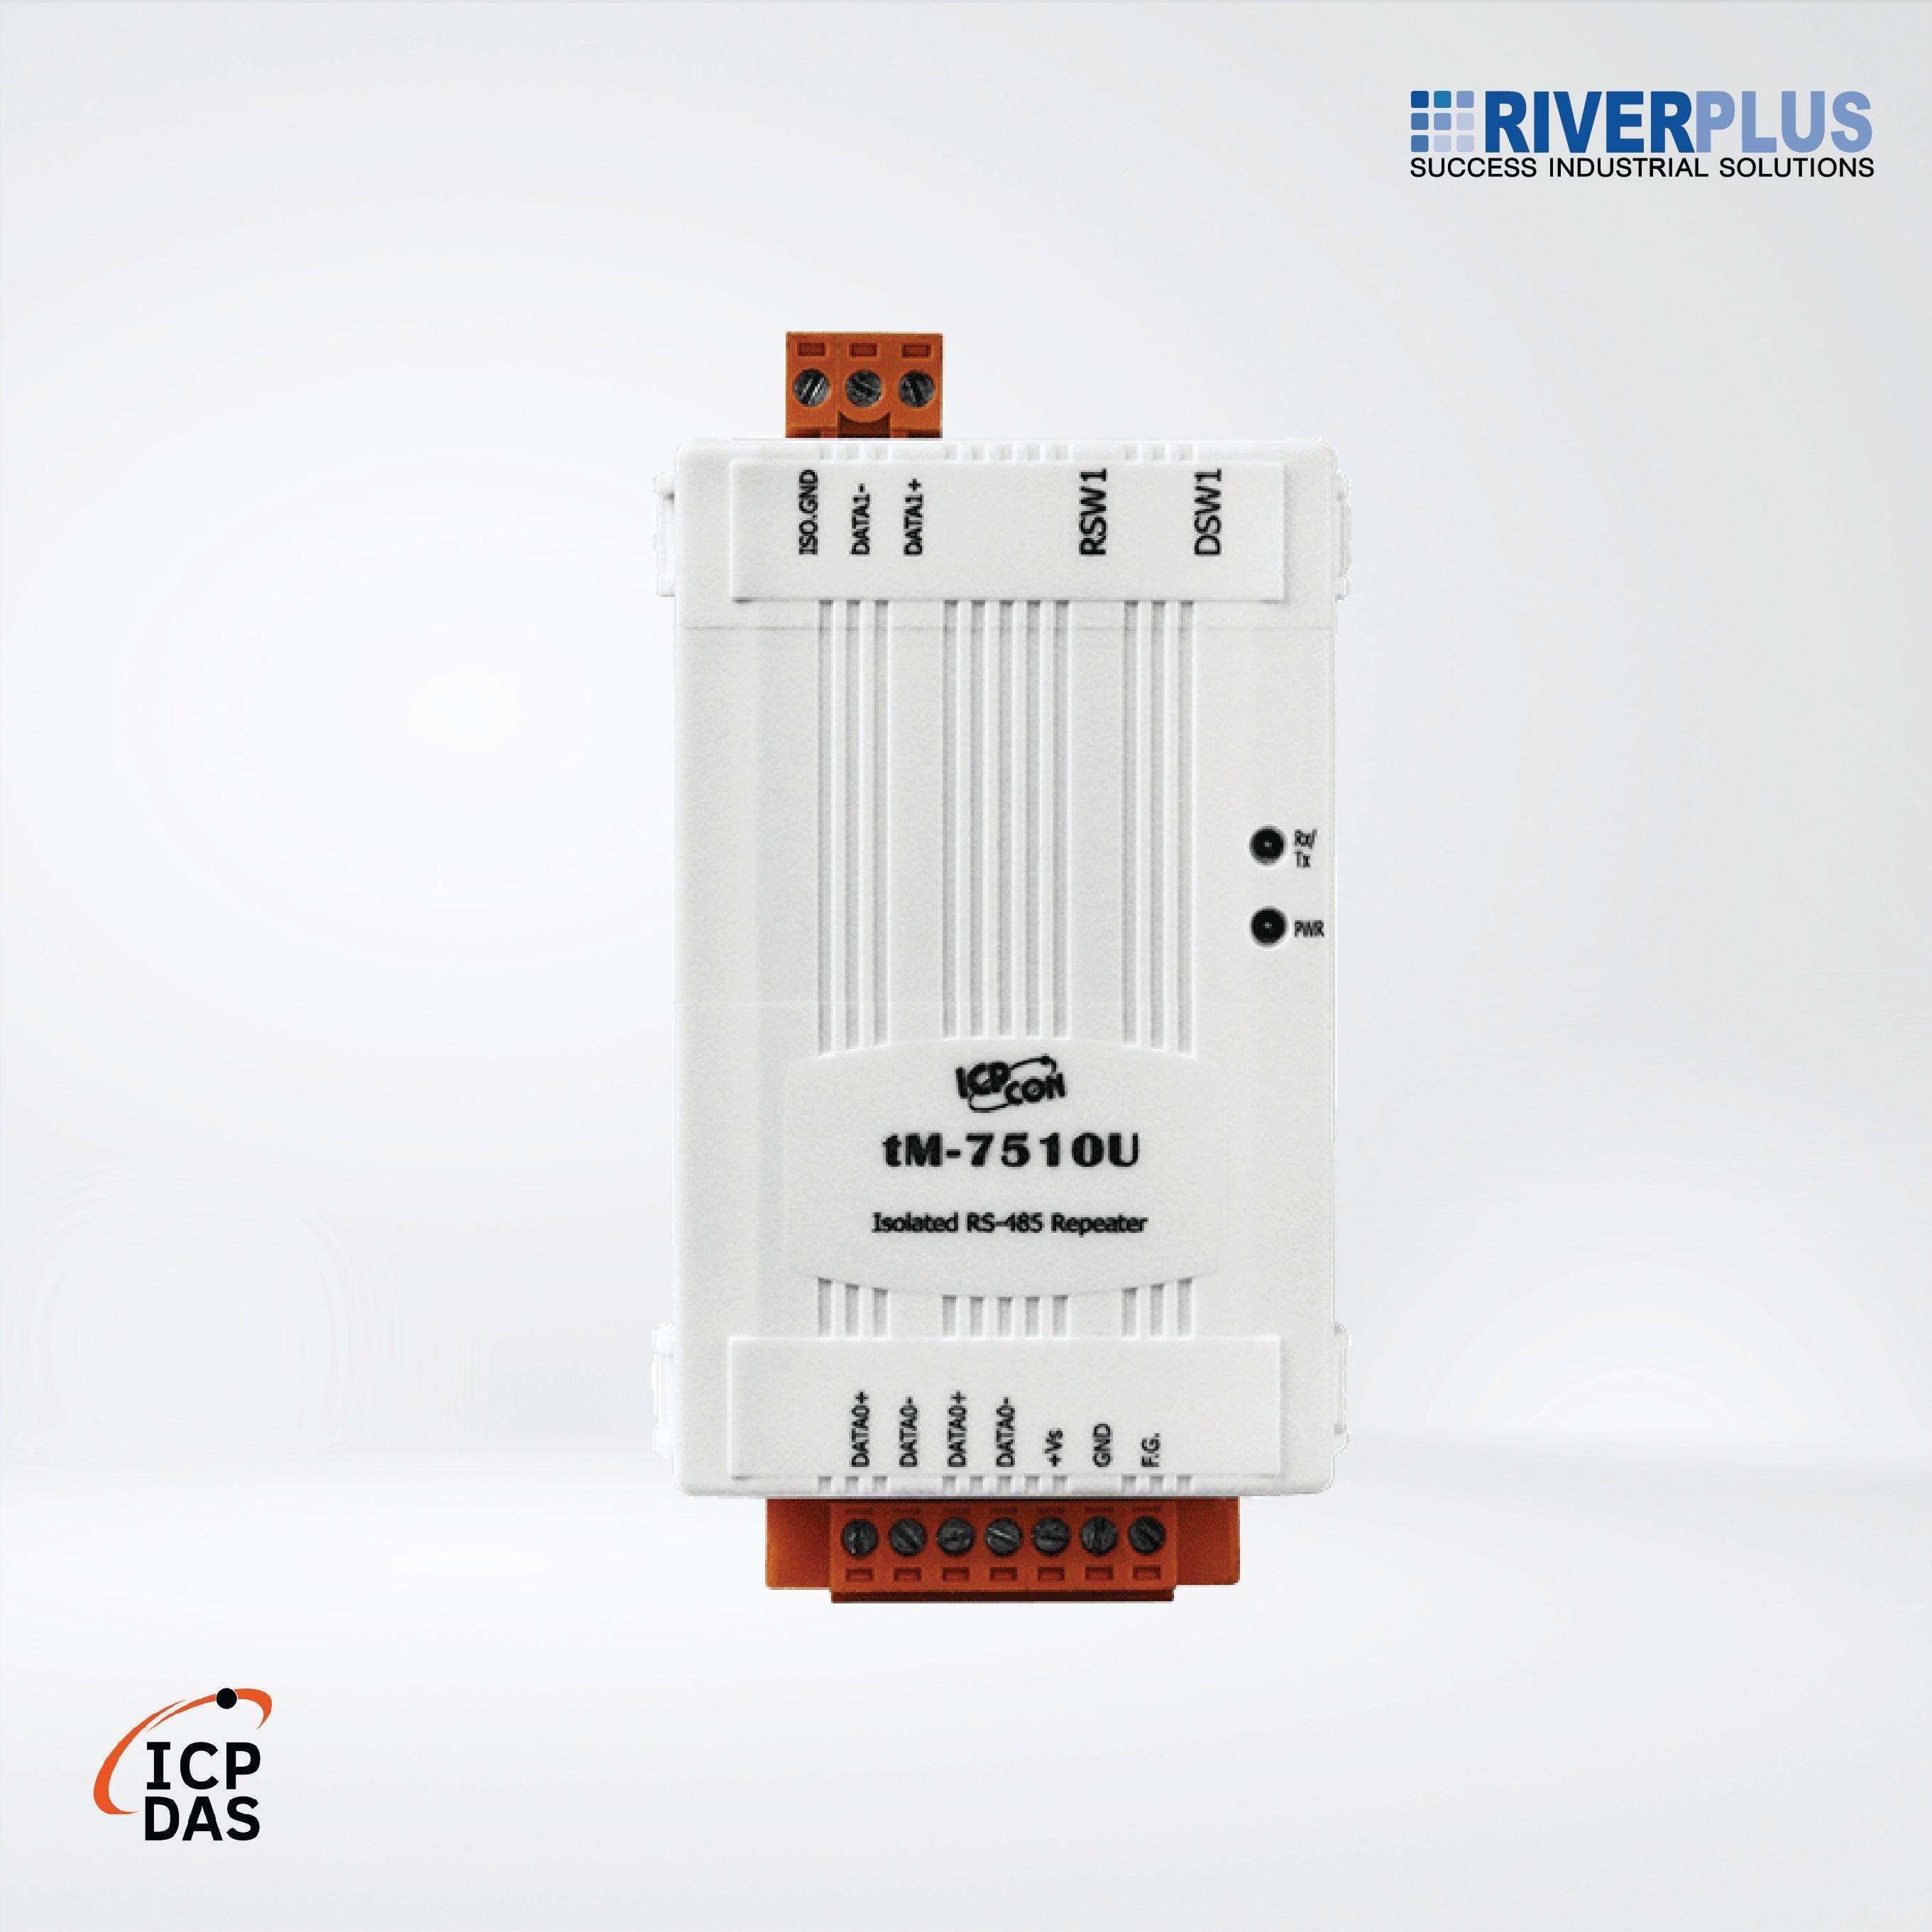 tM-7510U Tiny Isolated RS-485 Repeater - Riverplus